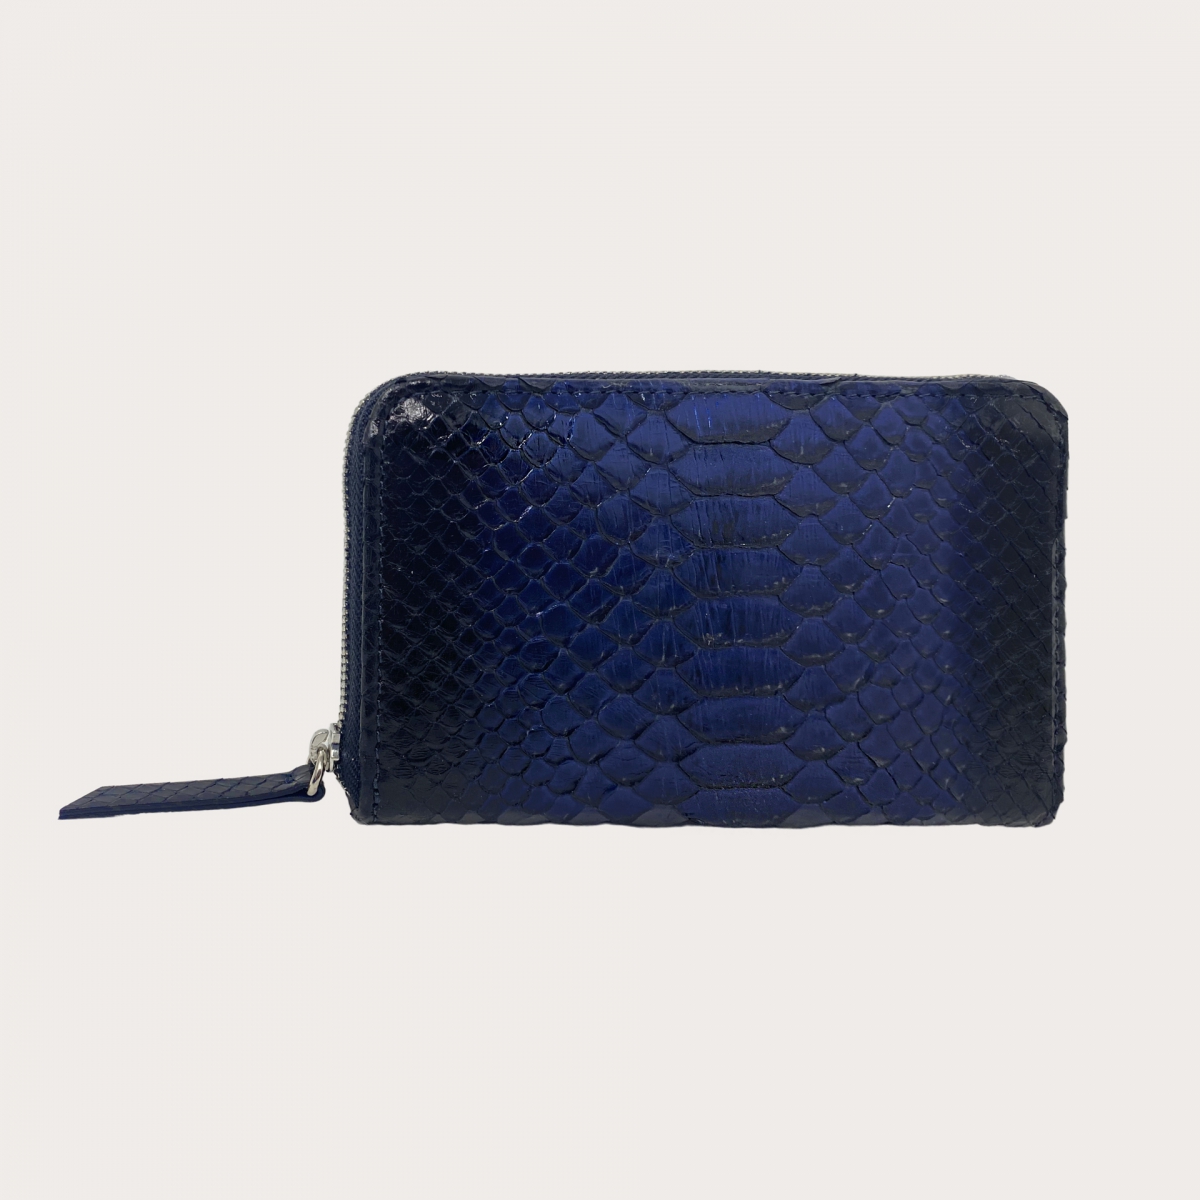 BRUCLE Women's compact wallet in python, blue faded black